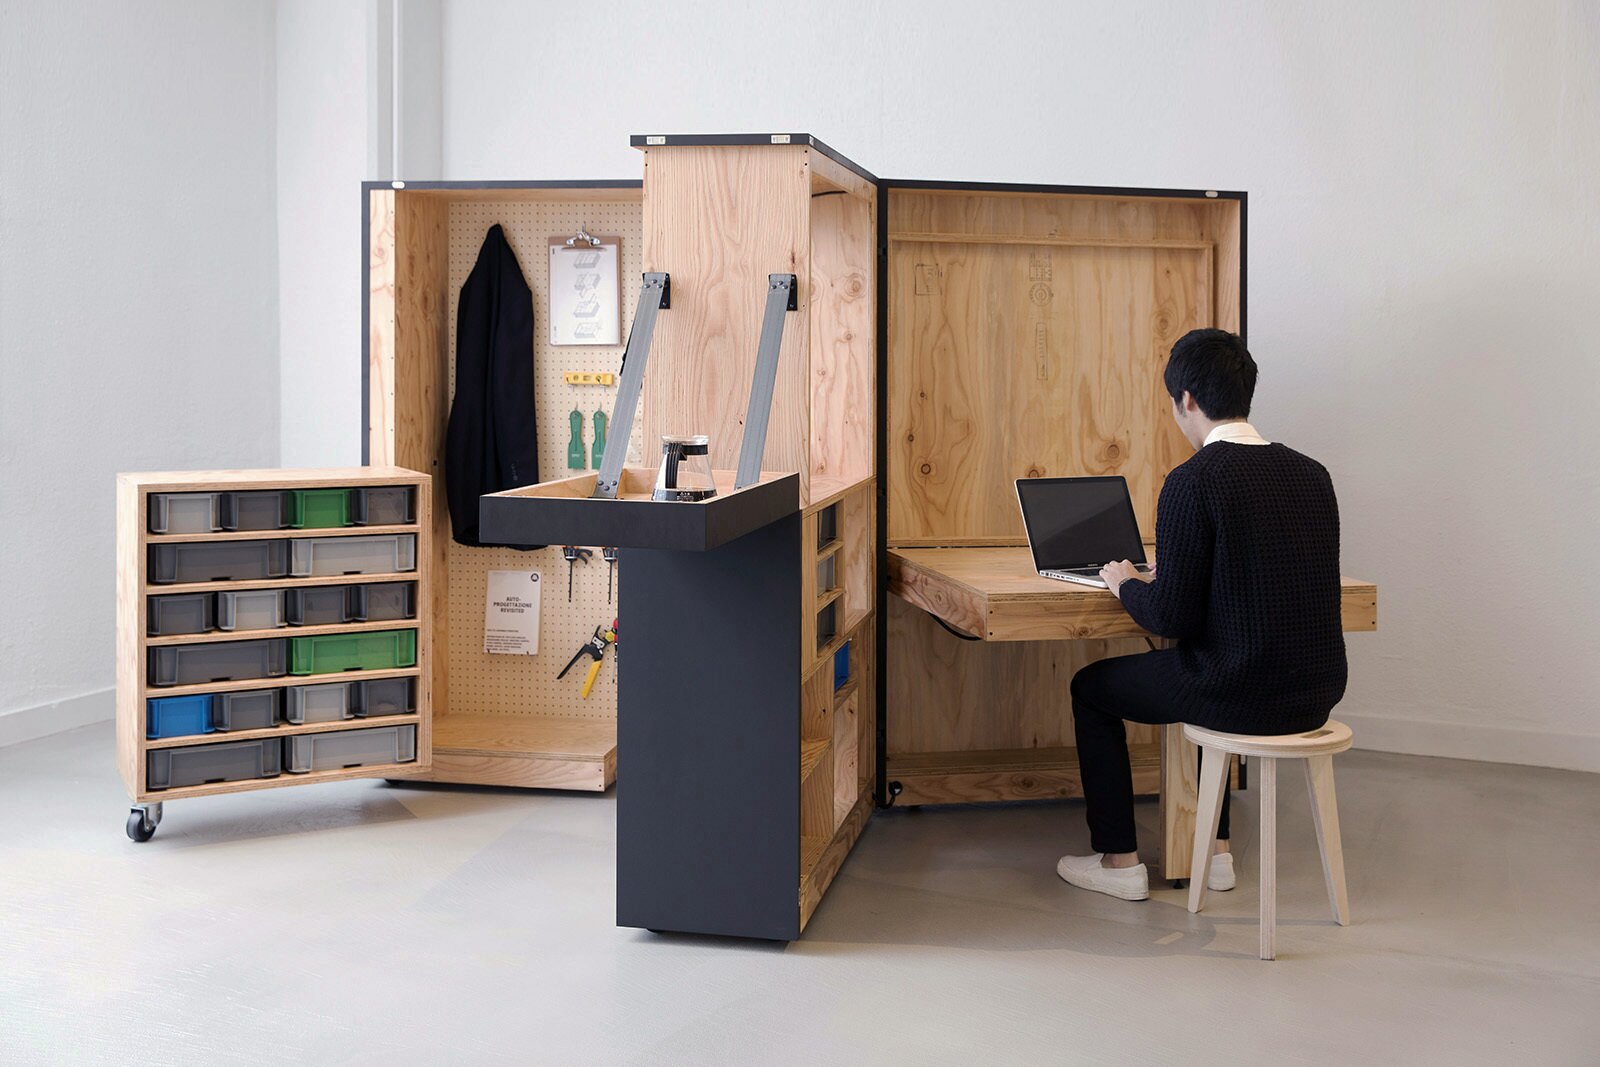 Roll Up Your Sleeves and Build This DIY Office in a Box